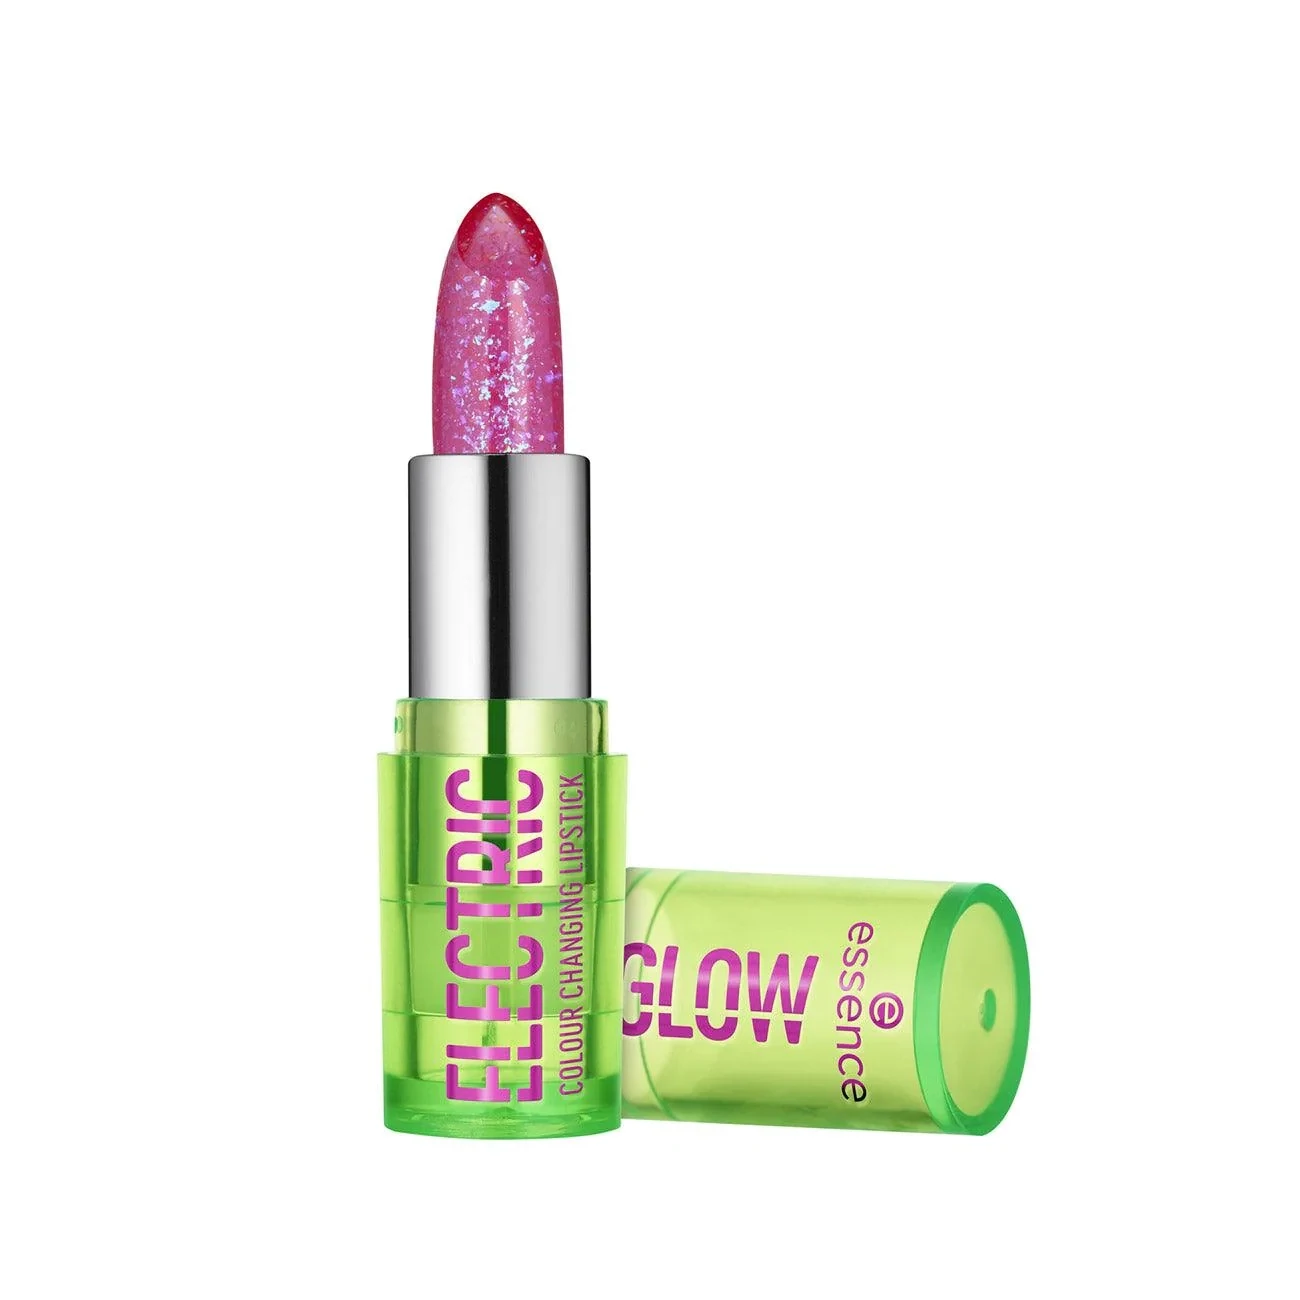 ESSENCE - Electric Glow Colour Changing Lipstick